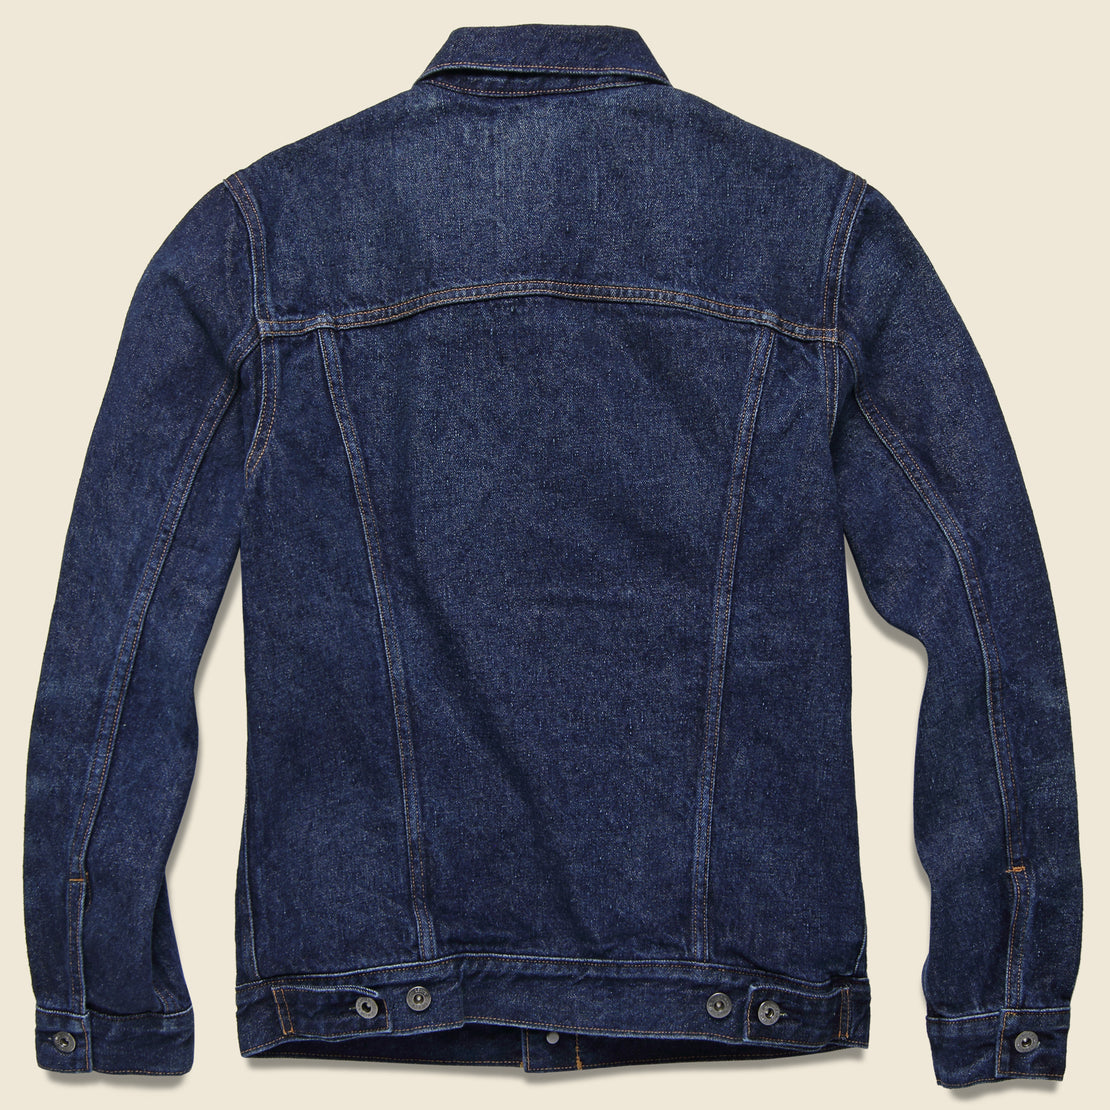 Type II Trucker Jacket - Neppy - Levis Made & Crafted - STAG Provisions - Outerwear - Coat / Jacket